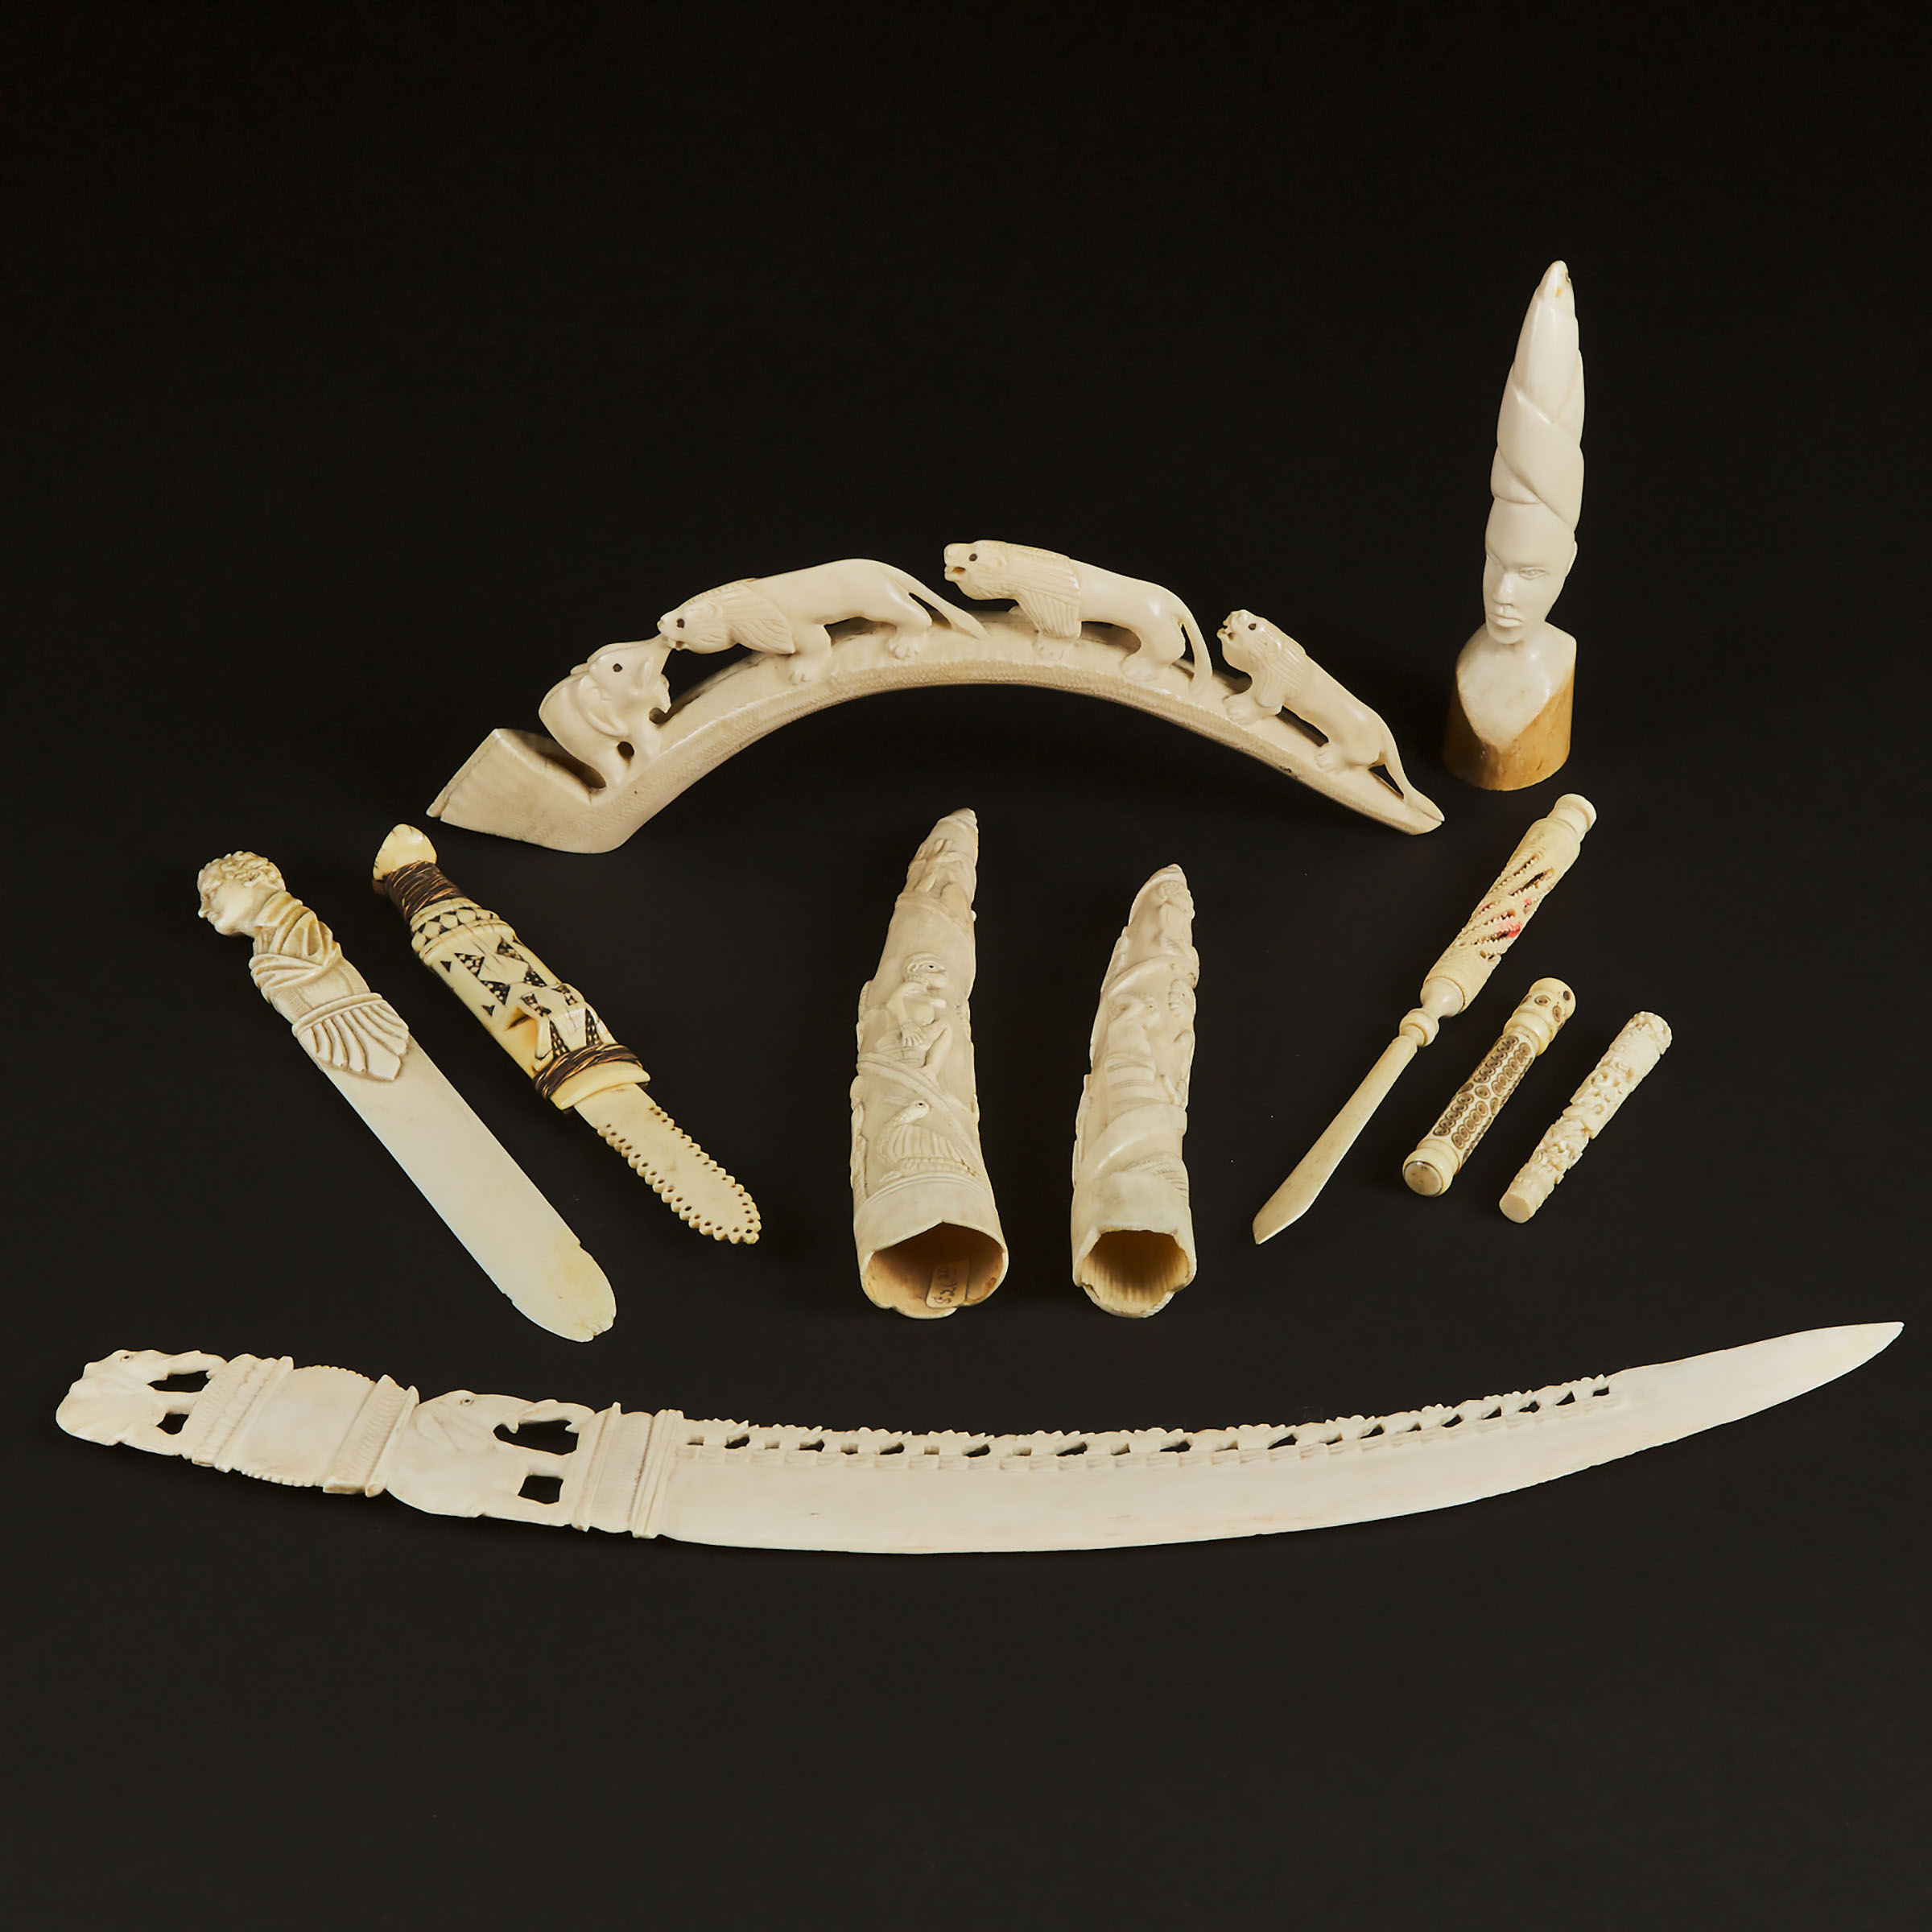 A Group of Ten Ivory and Bone Needle